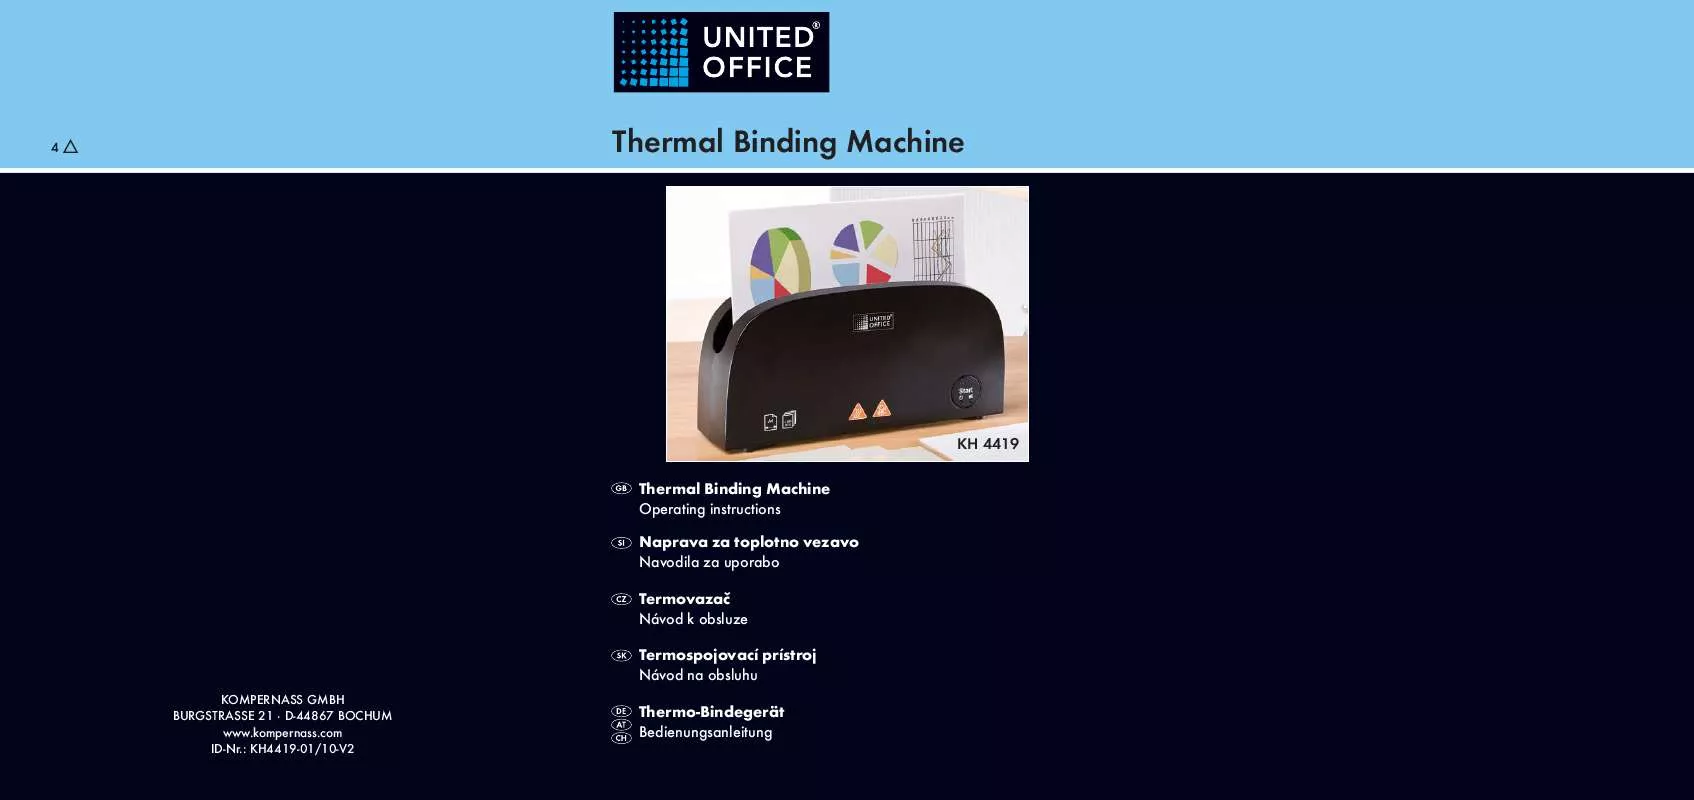 Mode d'emploi UNITED OFFICE KH 4419 THERMAL BINDING MACHINE